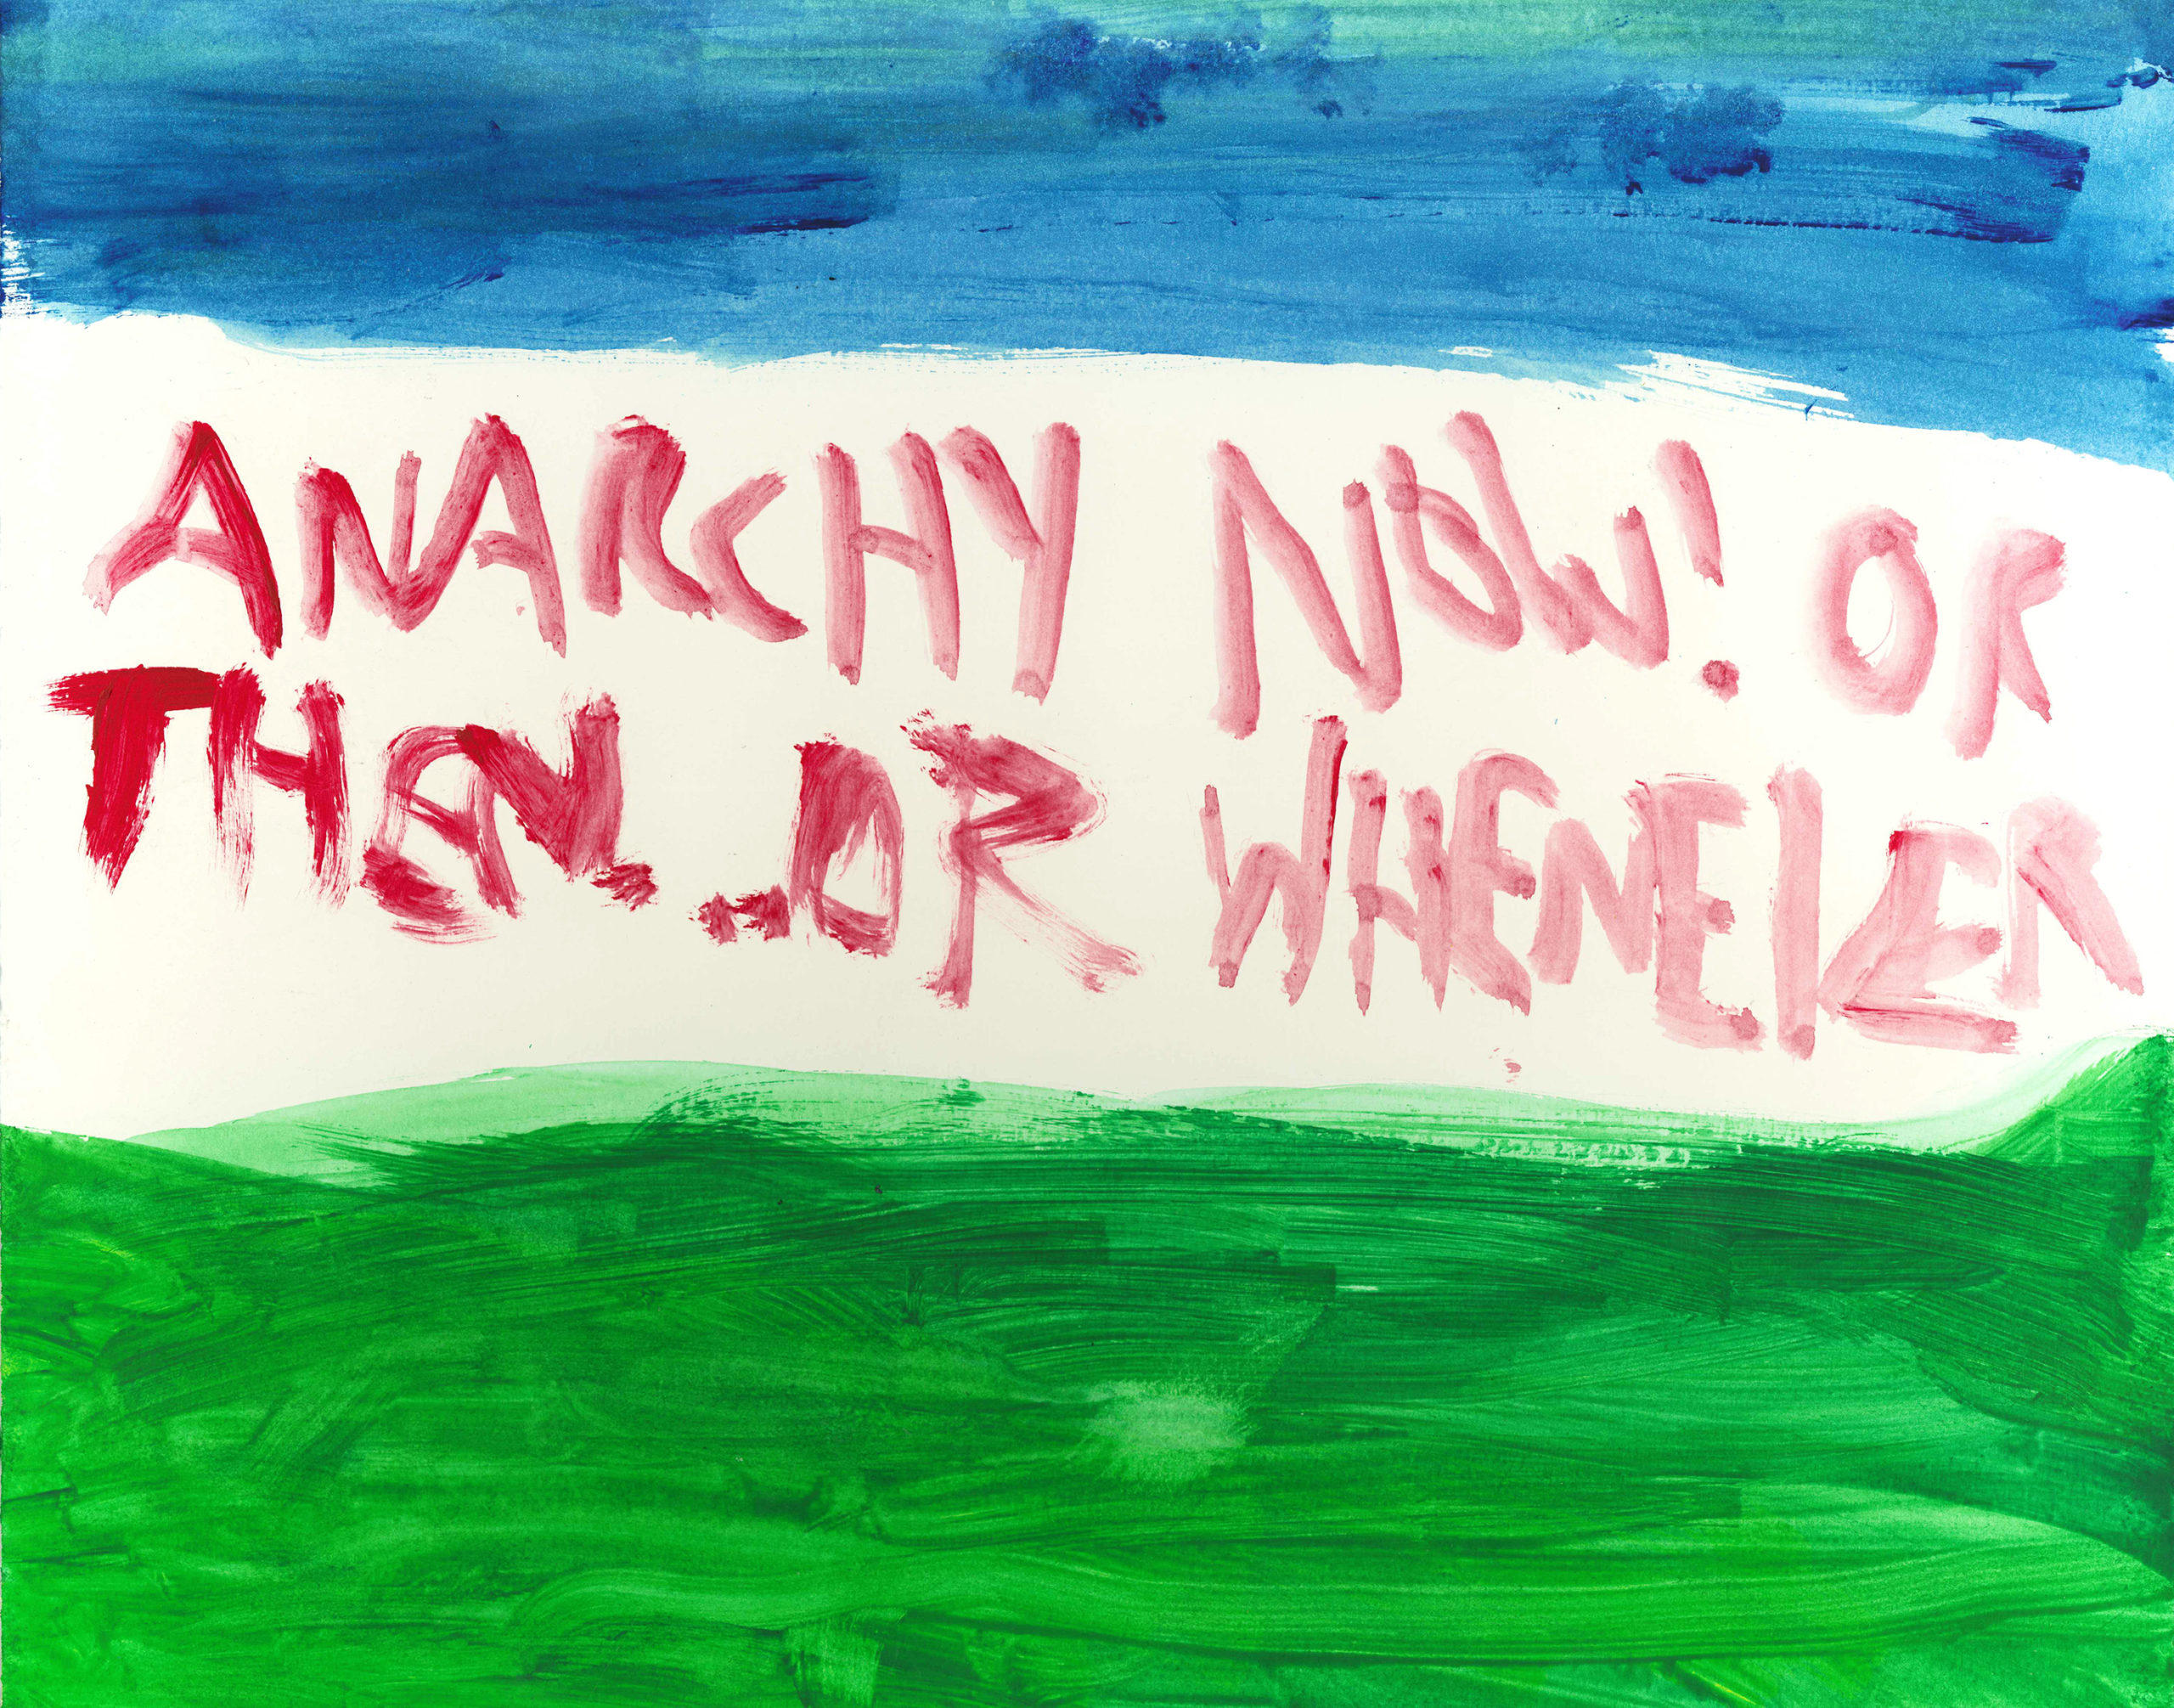 Jay Nugent. Anarchy Now! Watercolor on paper. Date unknown.